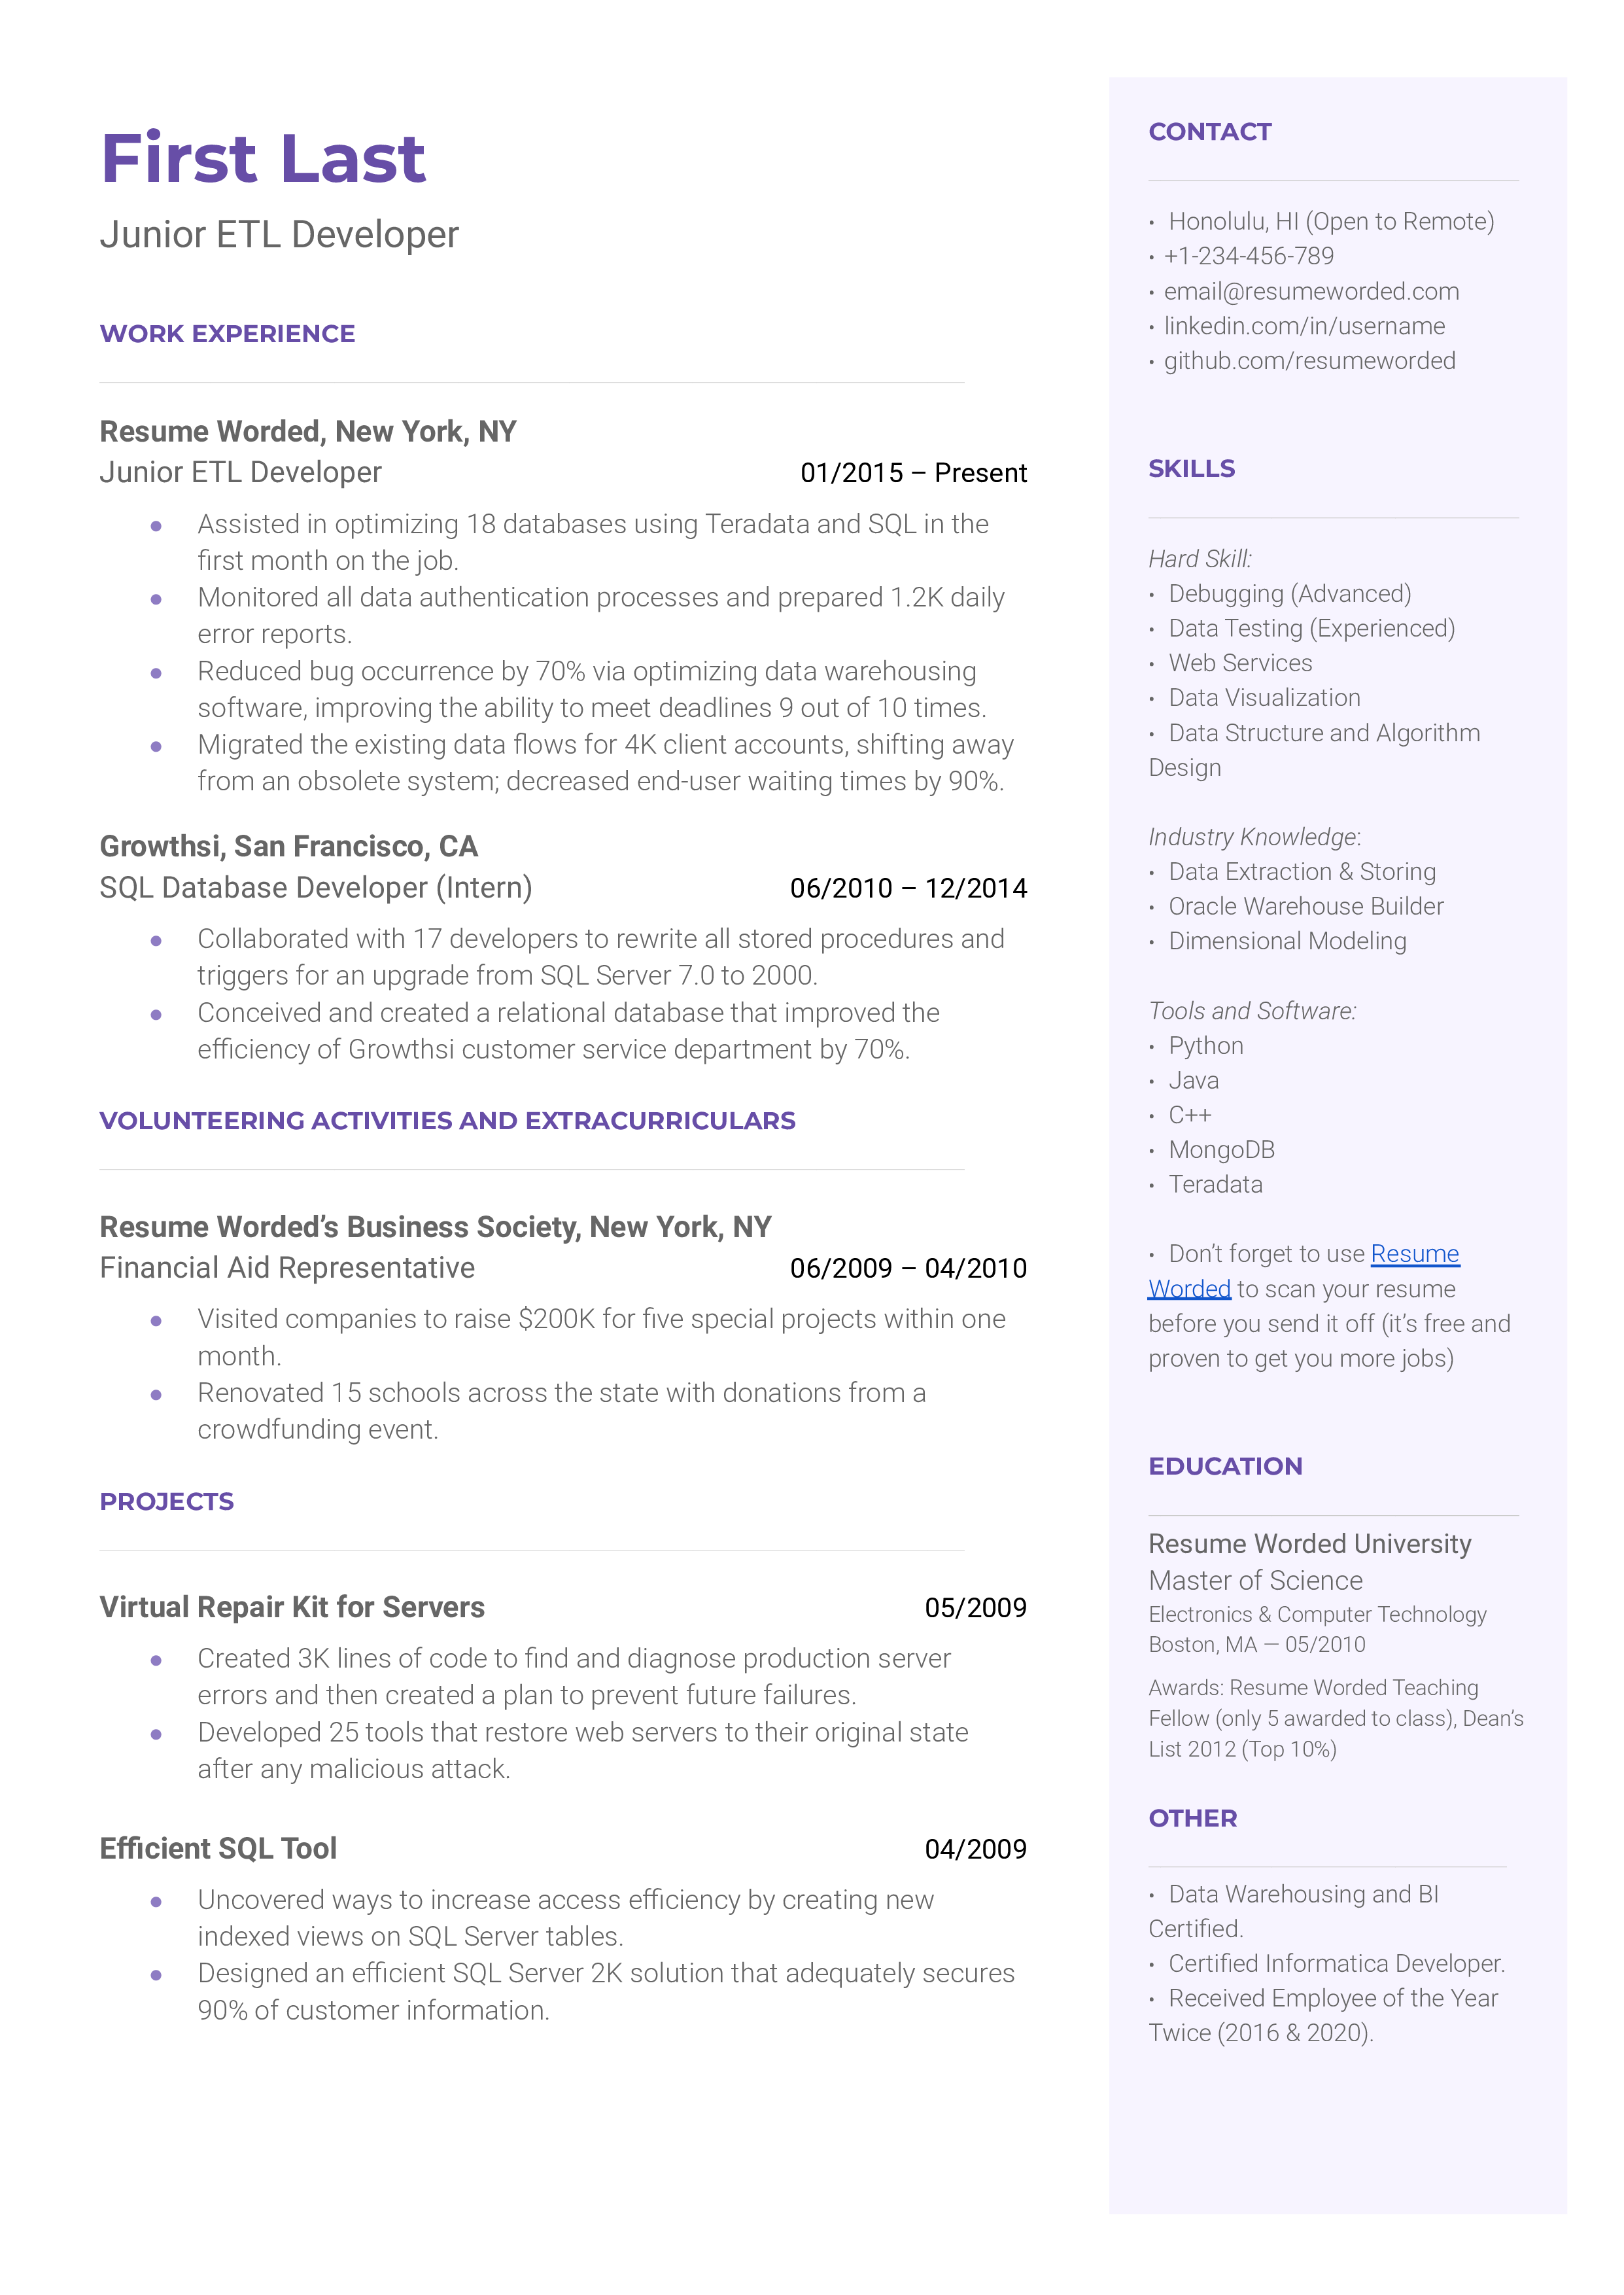 A Junior ETL developer resume template that uses strong action verbs 